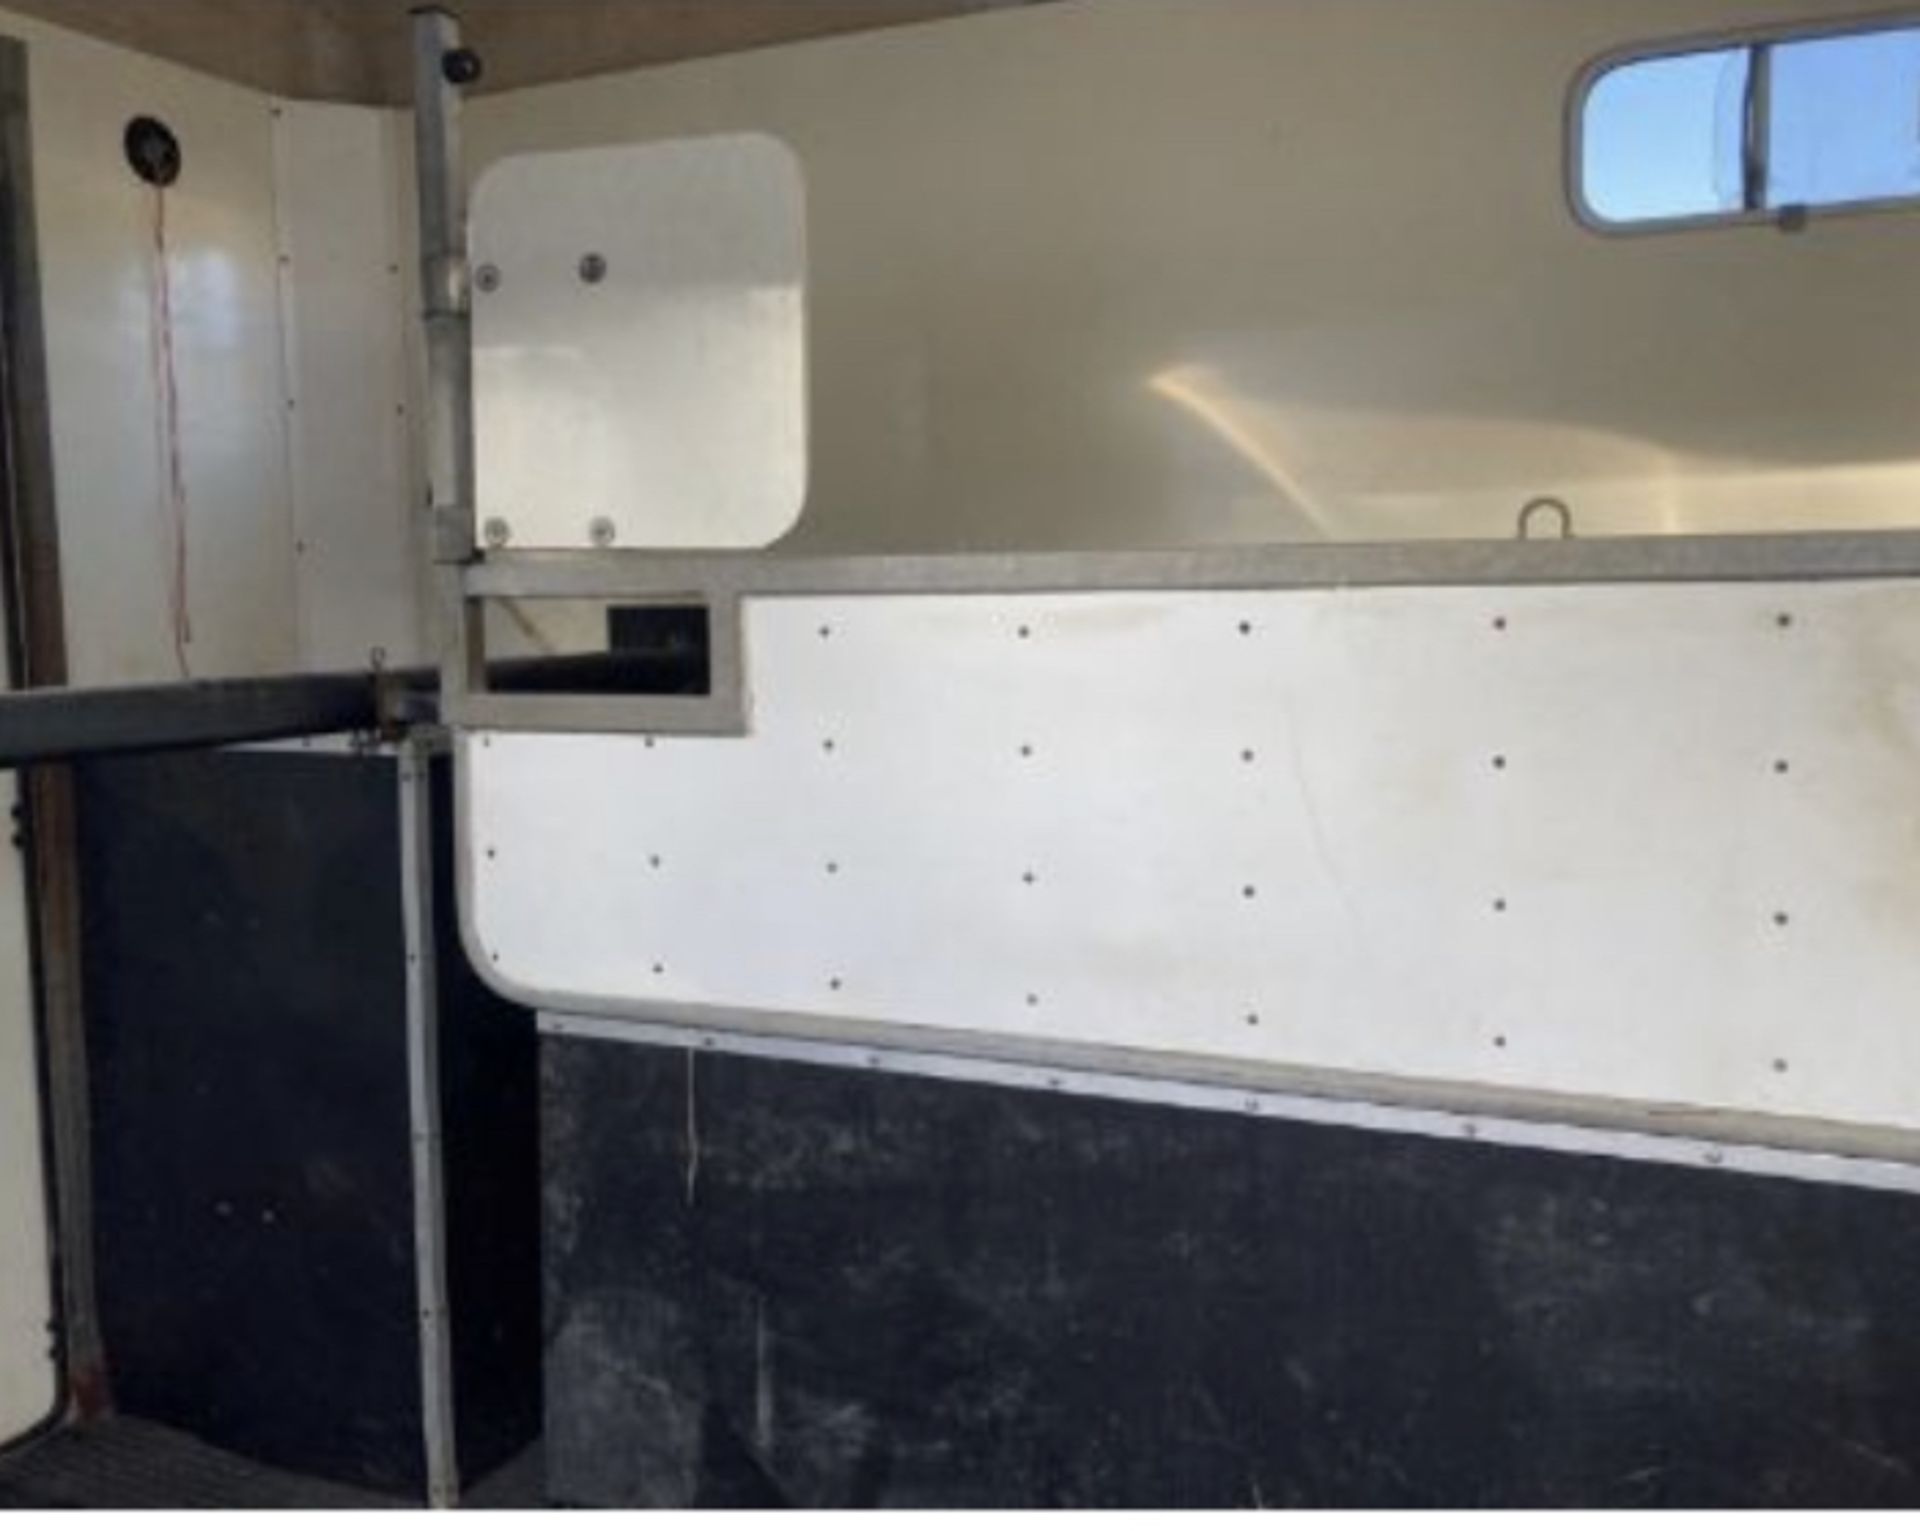 EQUITREK 2 HORSEBOX WITH DAY LIVING PARTITION. LOCATION: N.IRELAND - Image 7 of 10